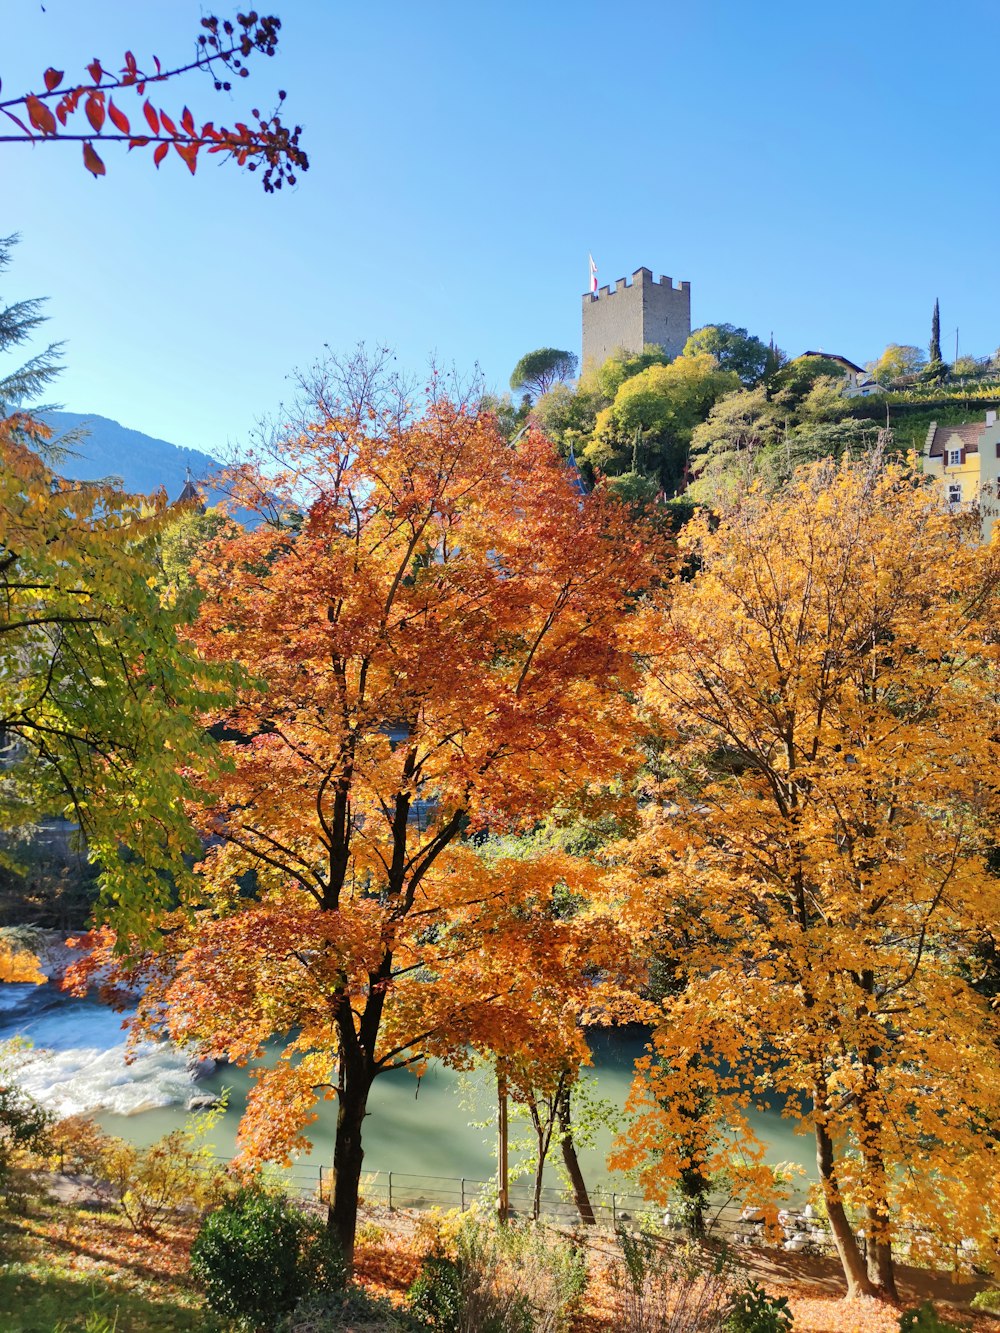 a river surrounded by trees with a castle in the background